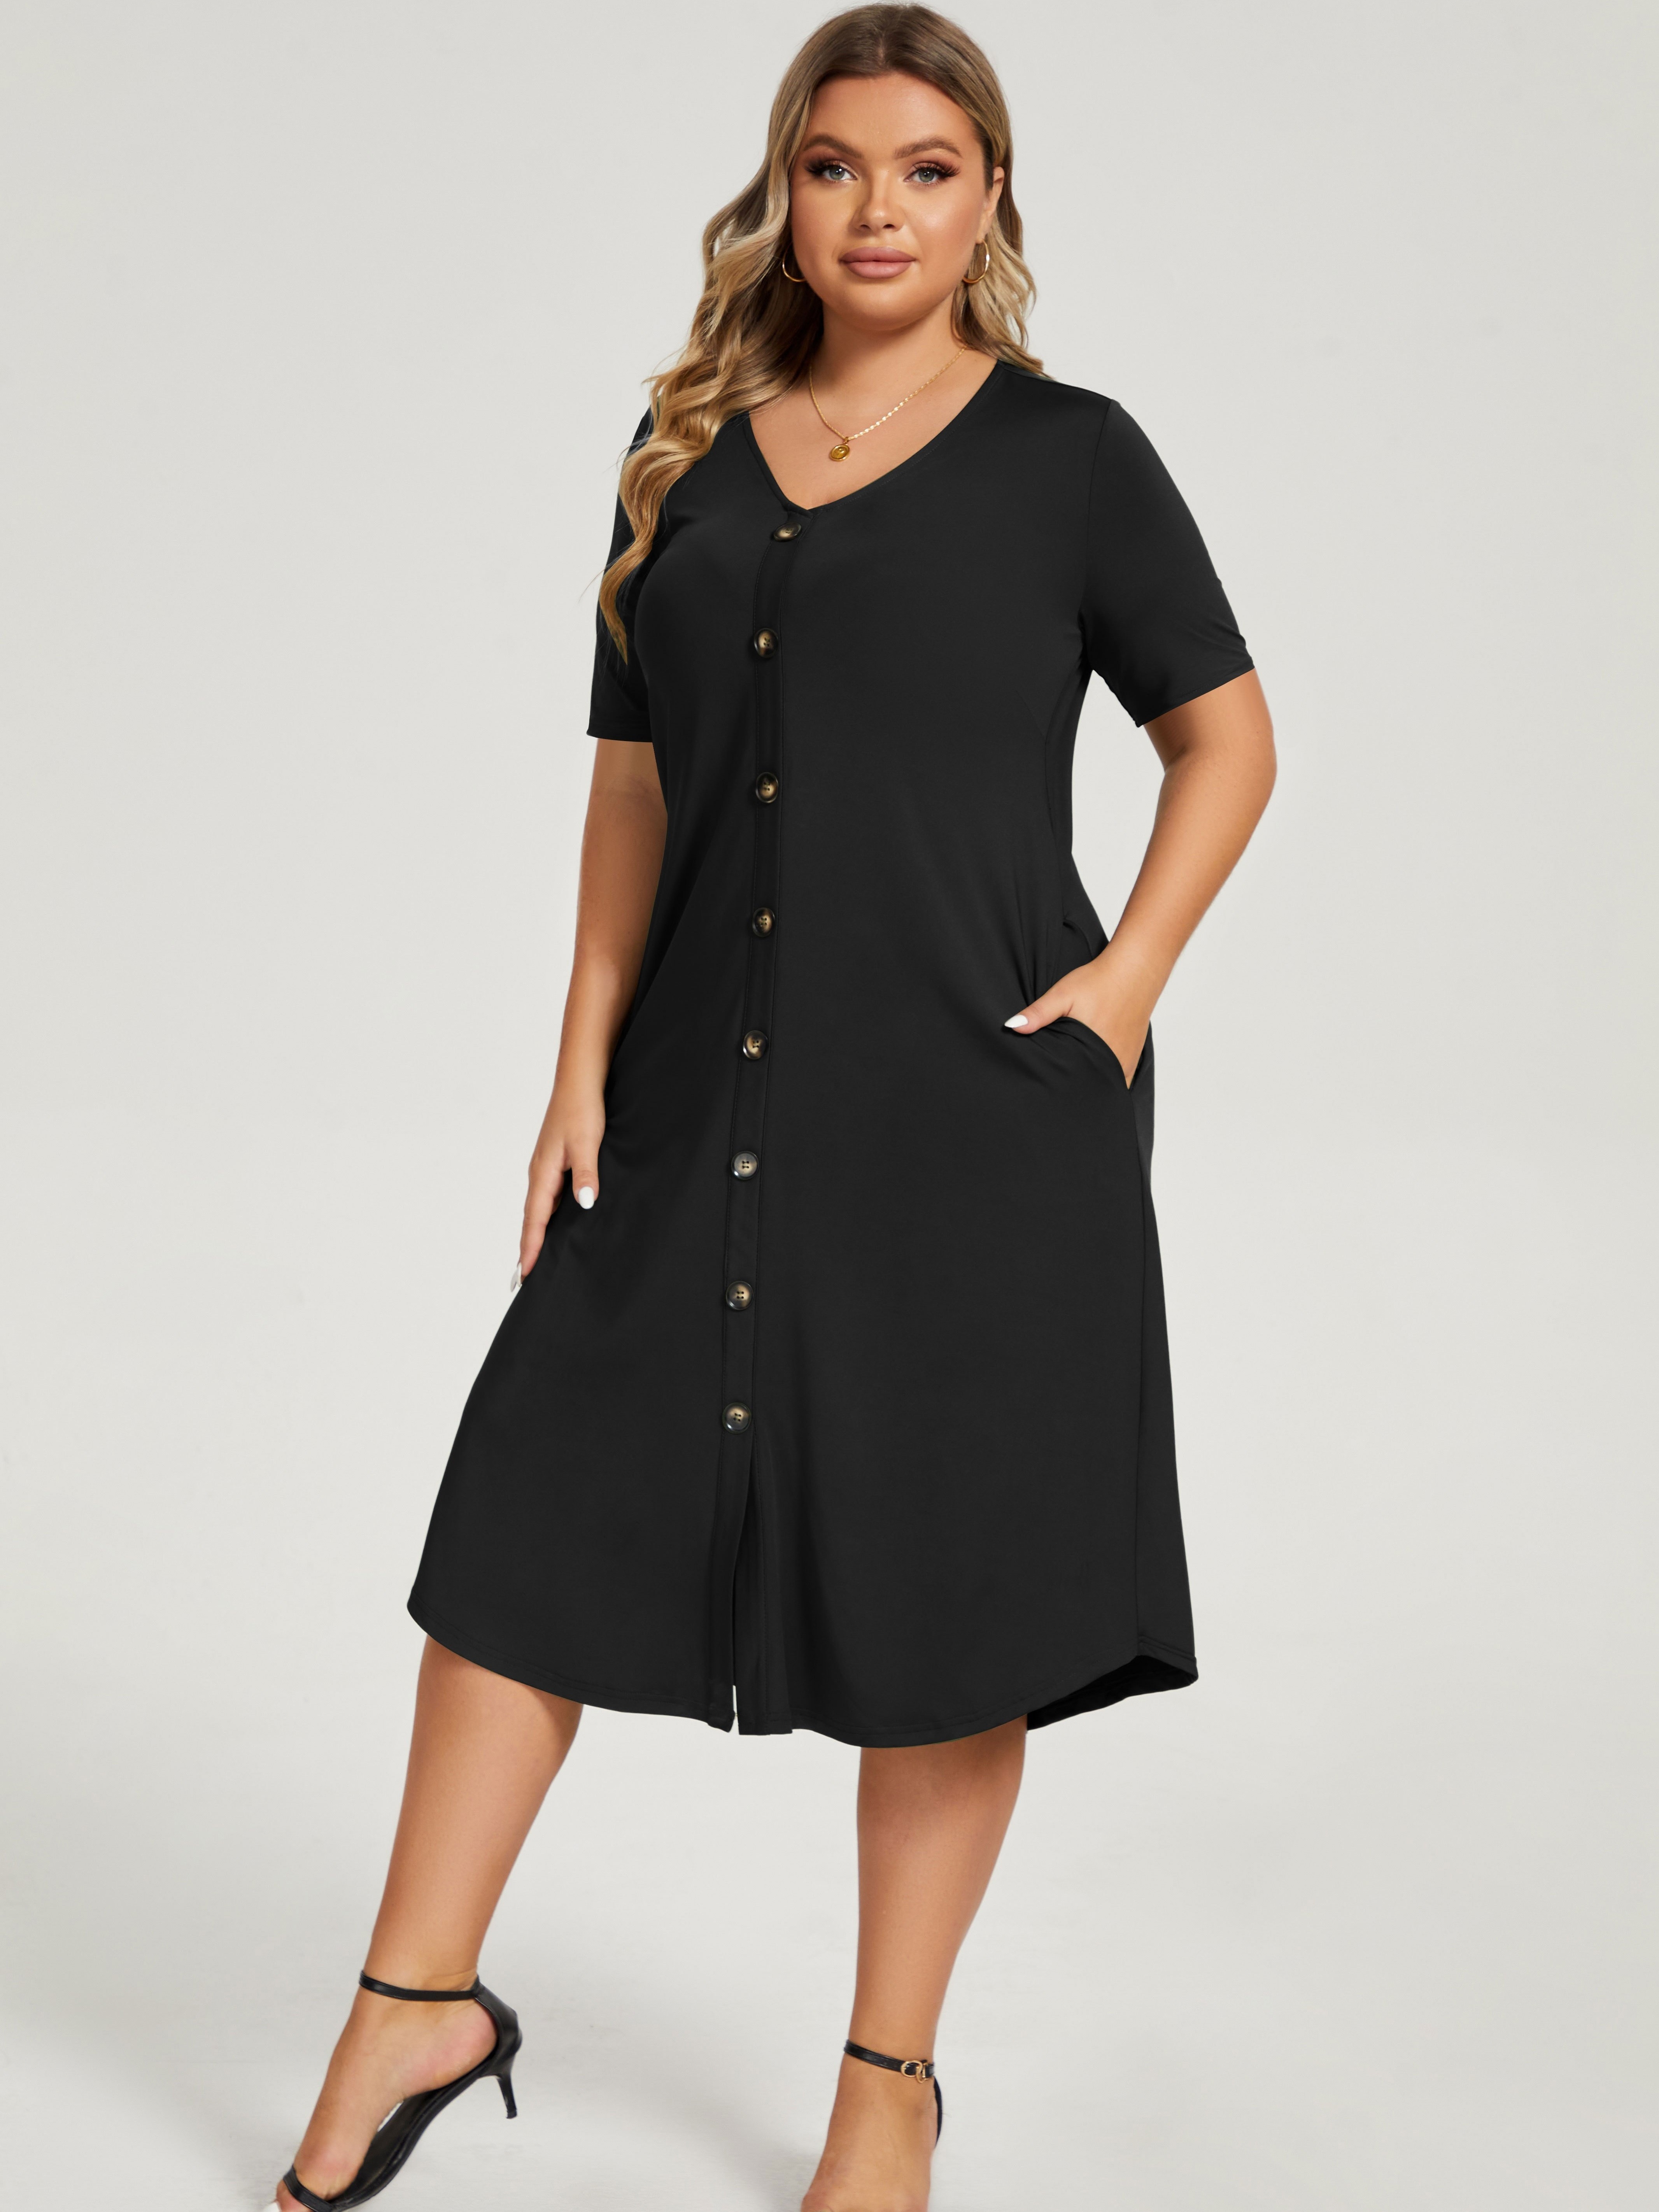 PIMOXV Women's Plus Size Solid Deep V Neck Short Sleeve Tunic Layered Flowy  Swing with Pockets Maxi Dress, Plus Size A Line Dress